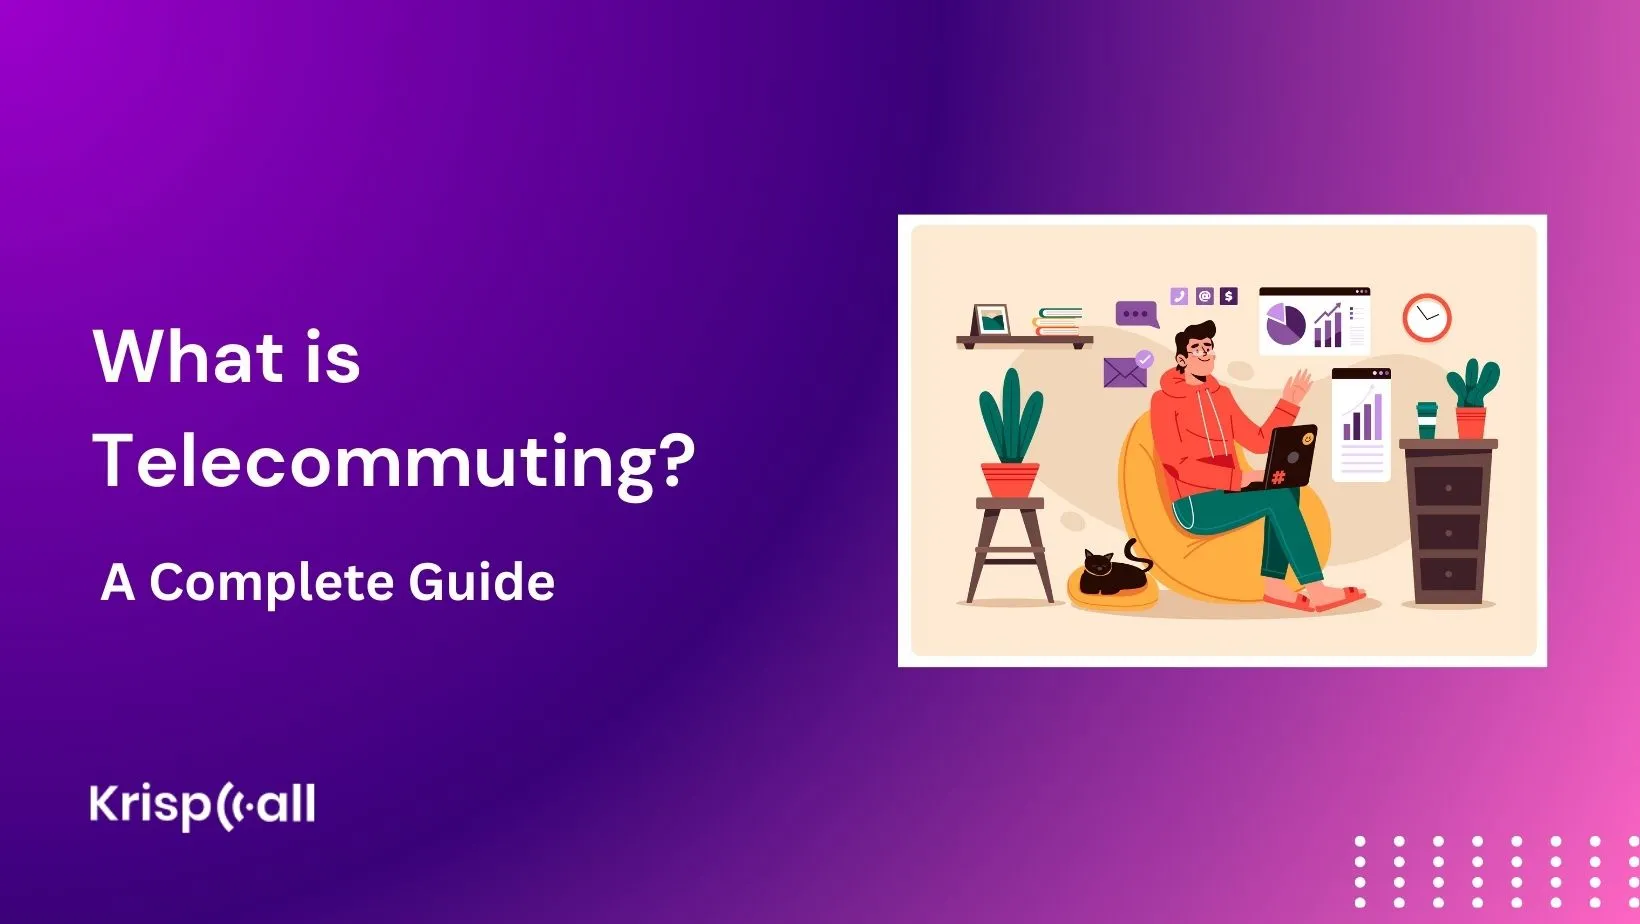 What is Telecommuting? A Complete Guide